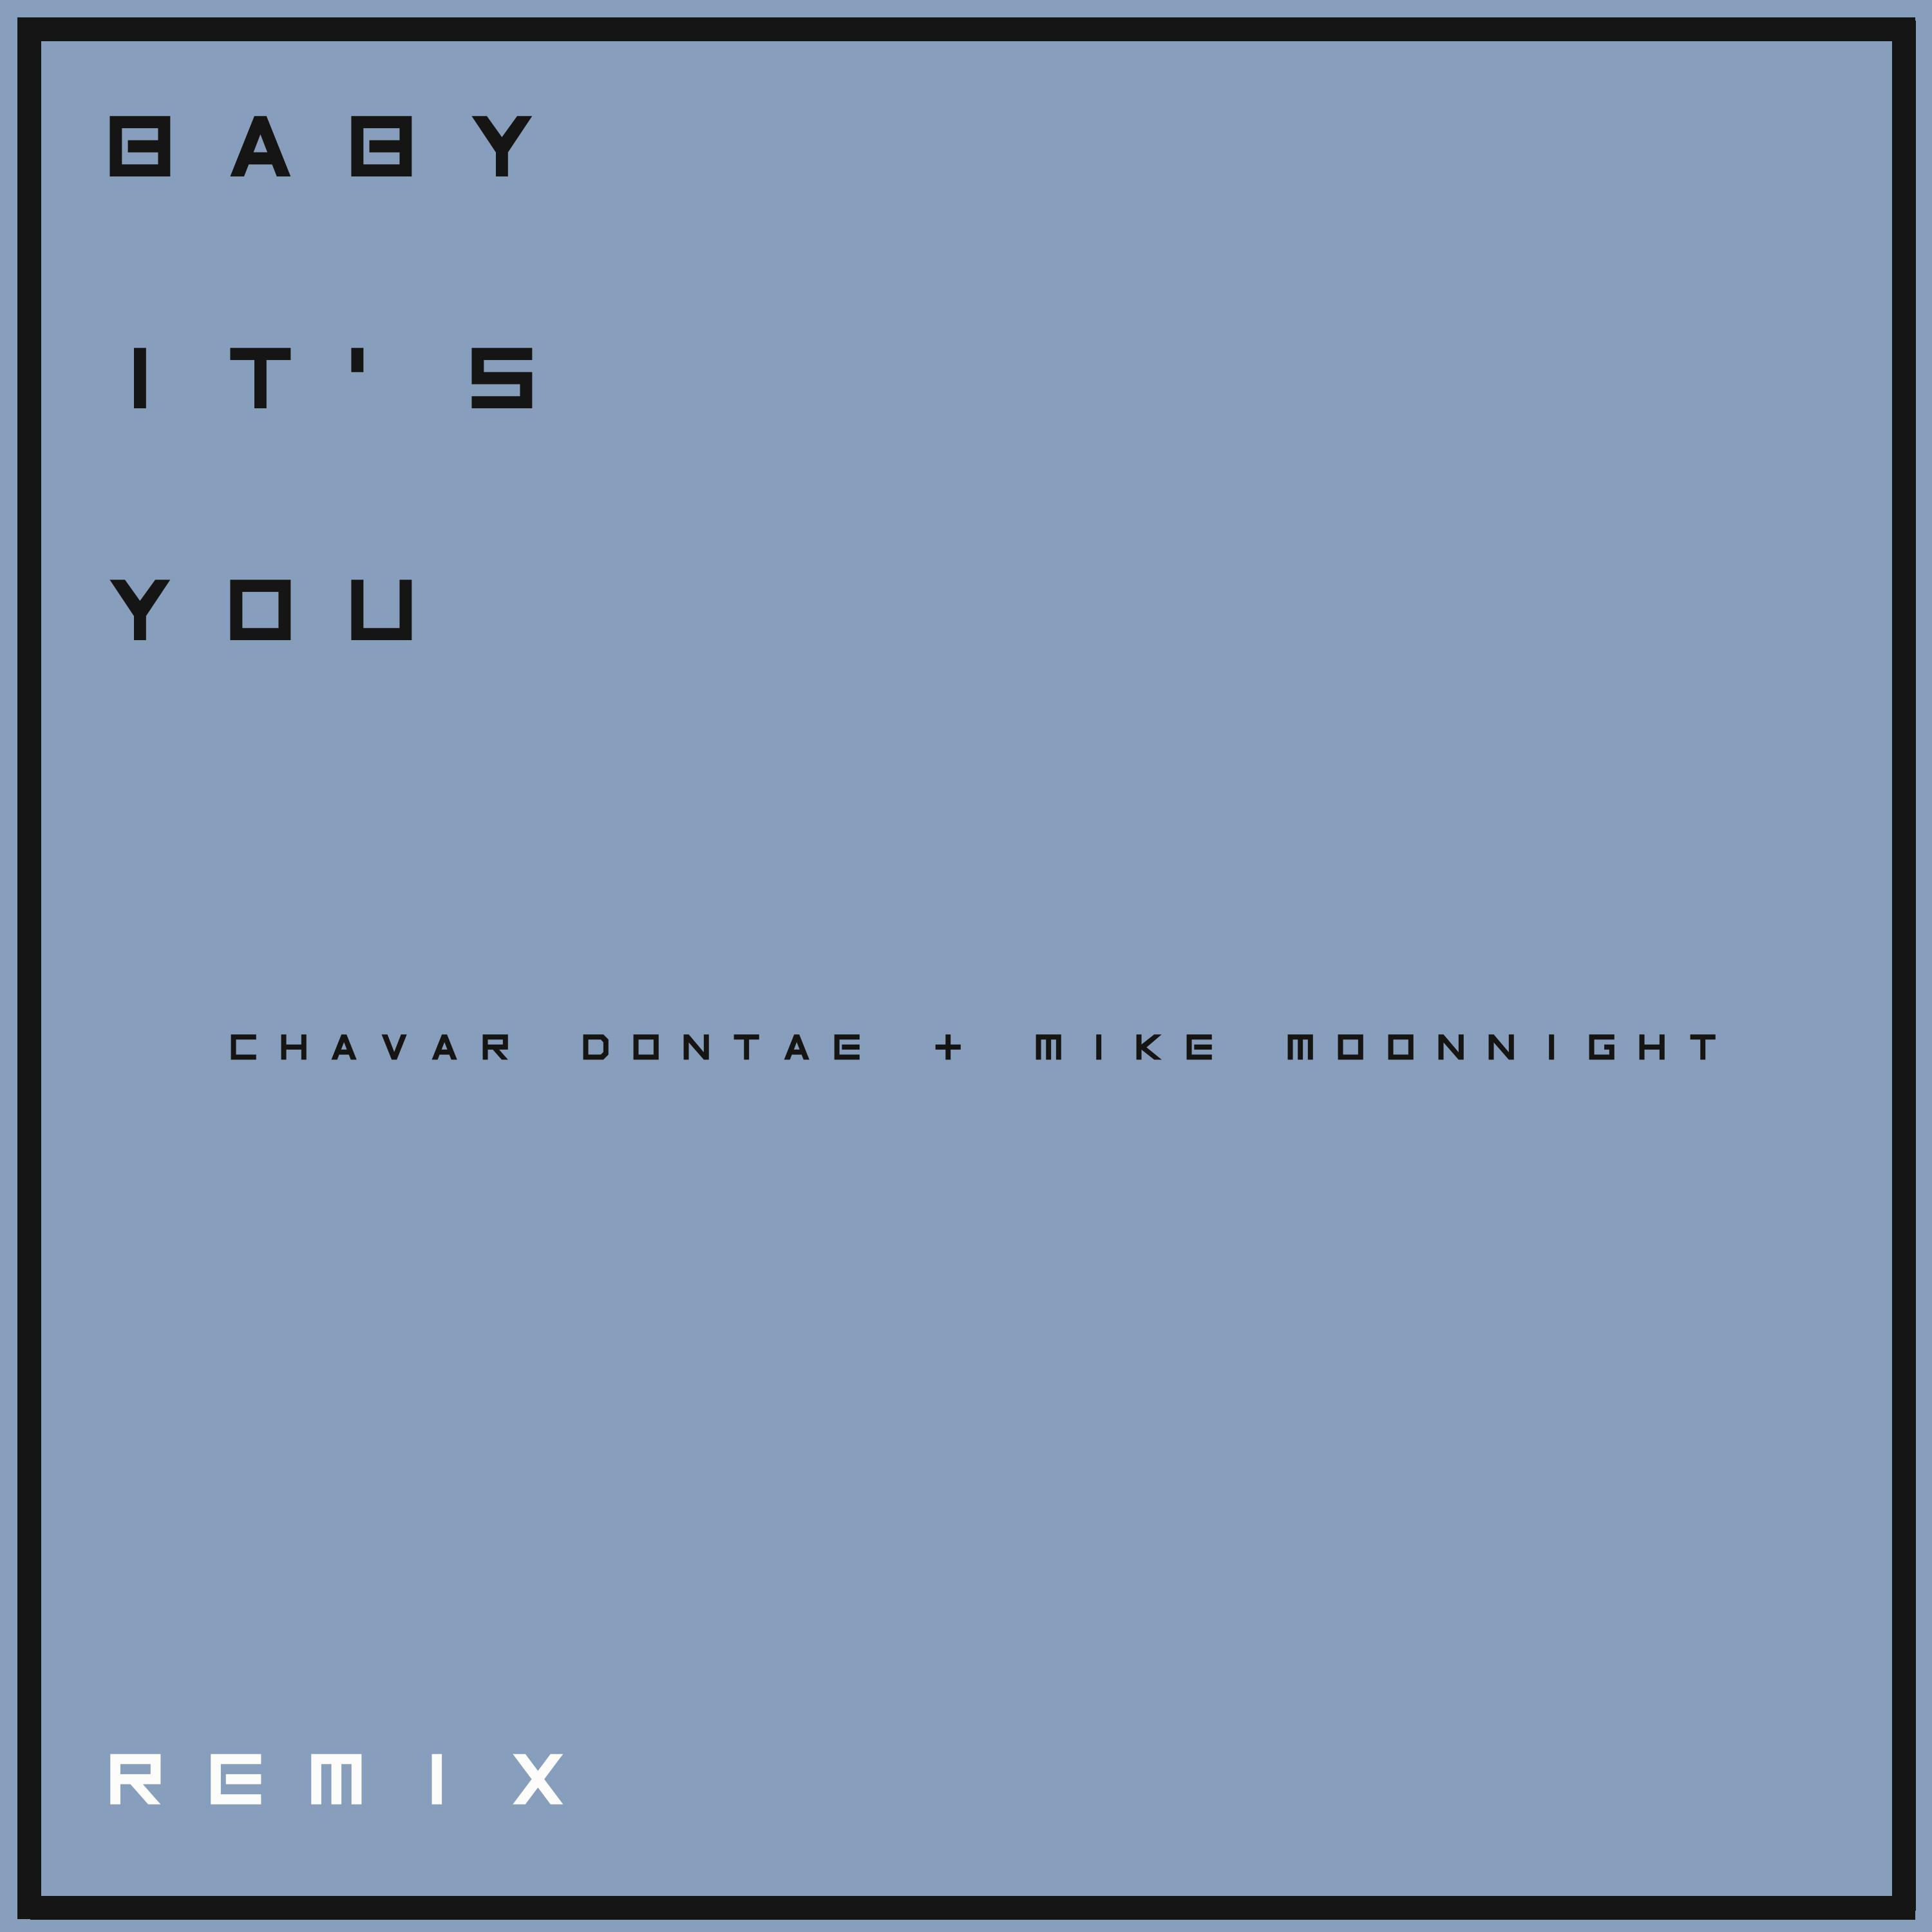 Chavar Dontae - Baby It's You (Remix)